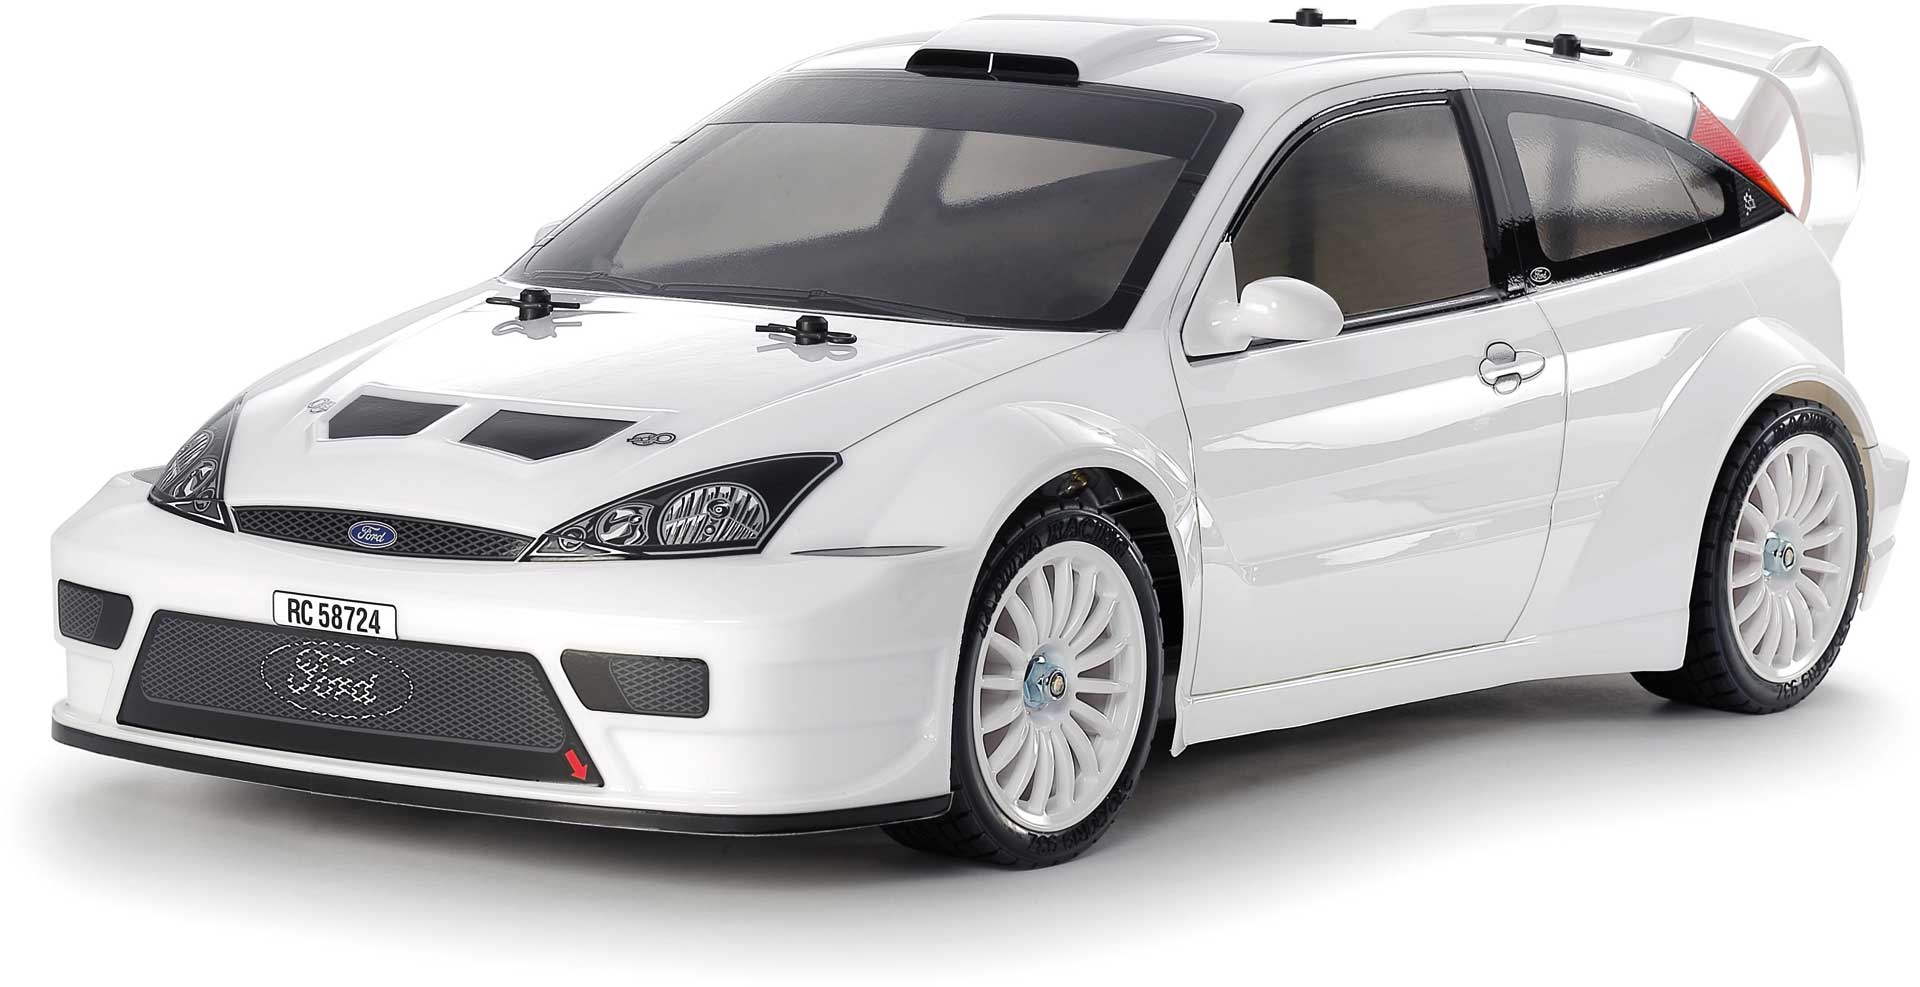 TAMIYA Ford Focus RS Custom 1/10 TT-02 kit with pre-painted body